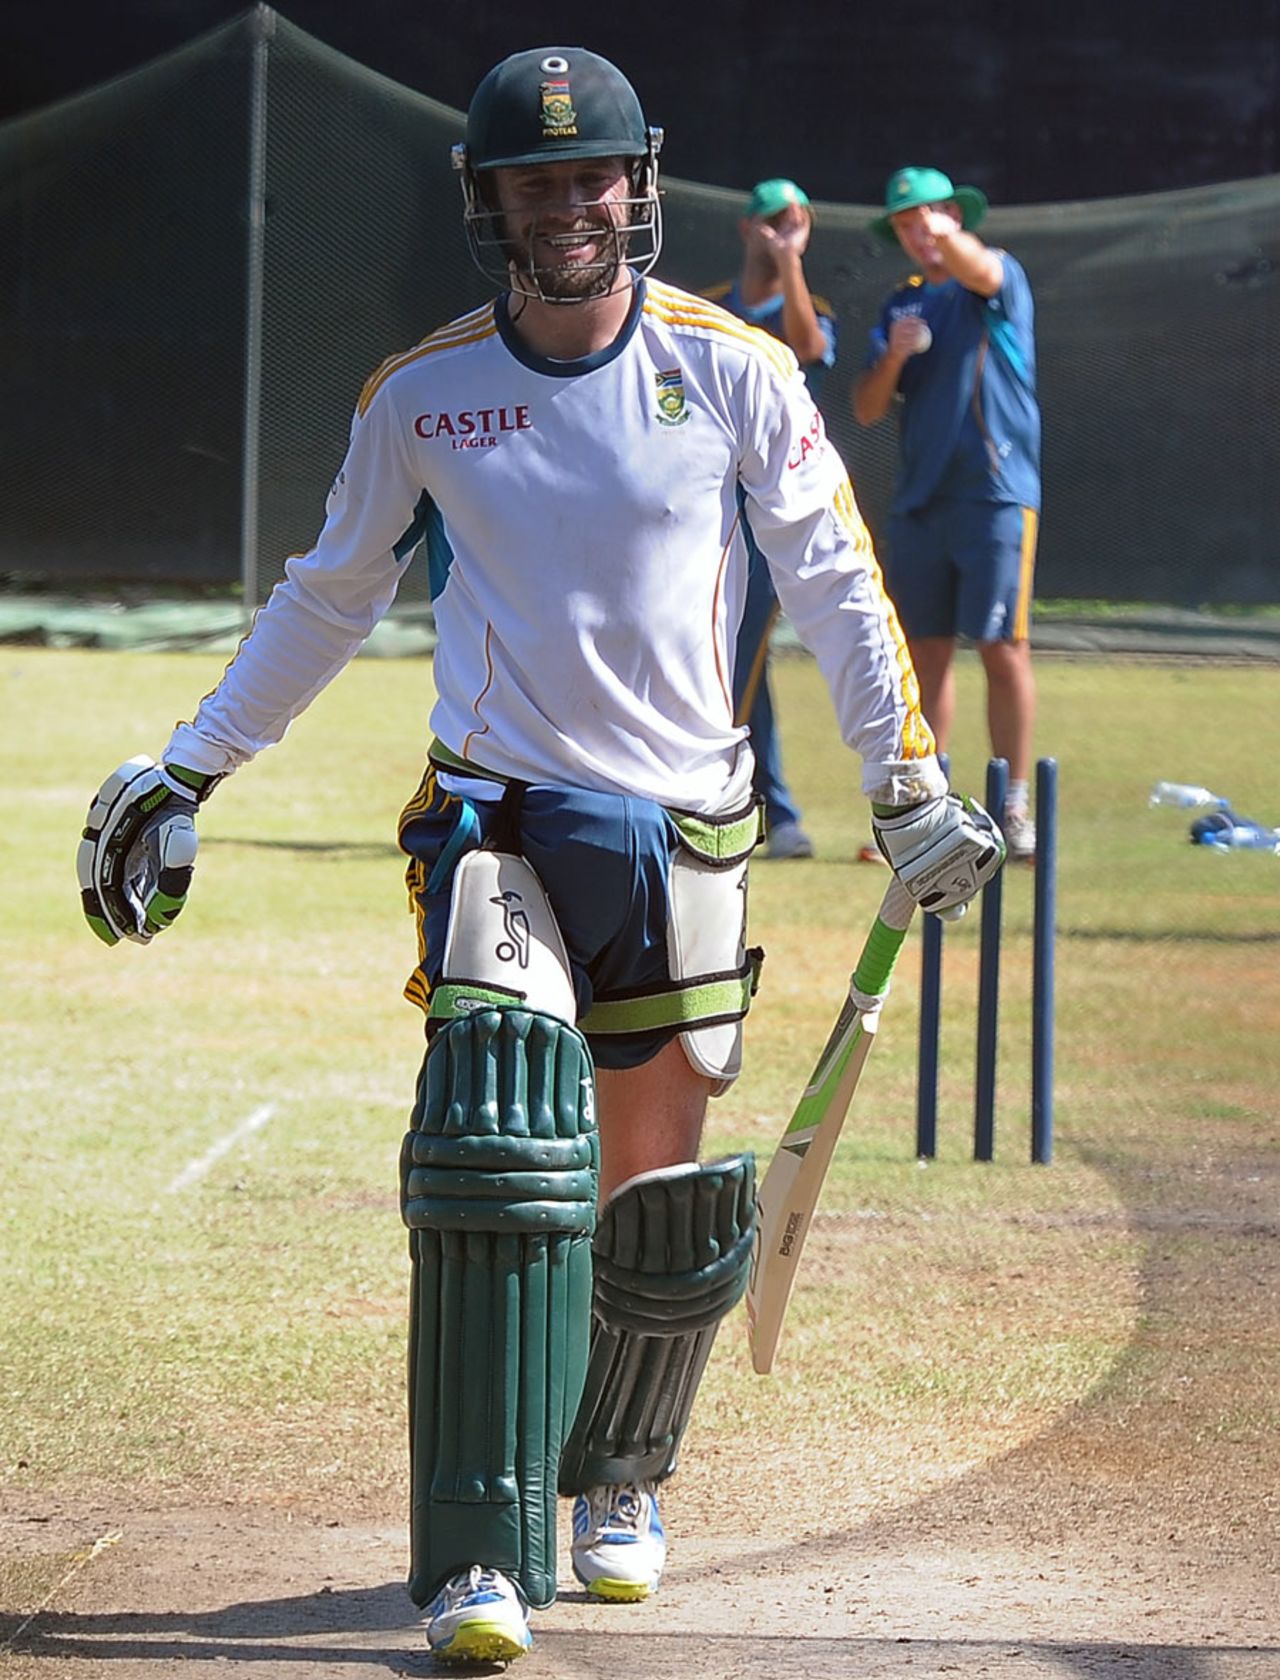 AB de Villiers smiles during a nets session, Colombo, July 30, 2013